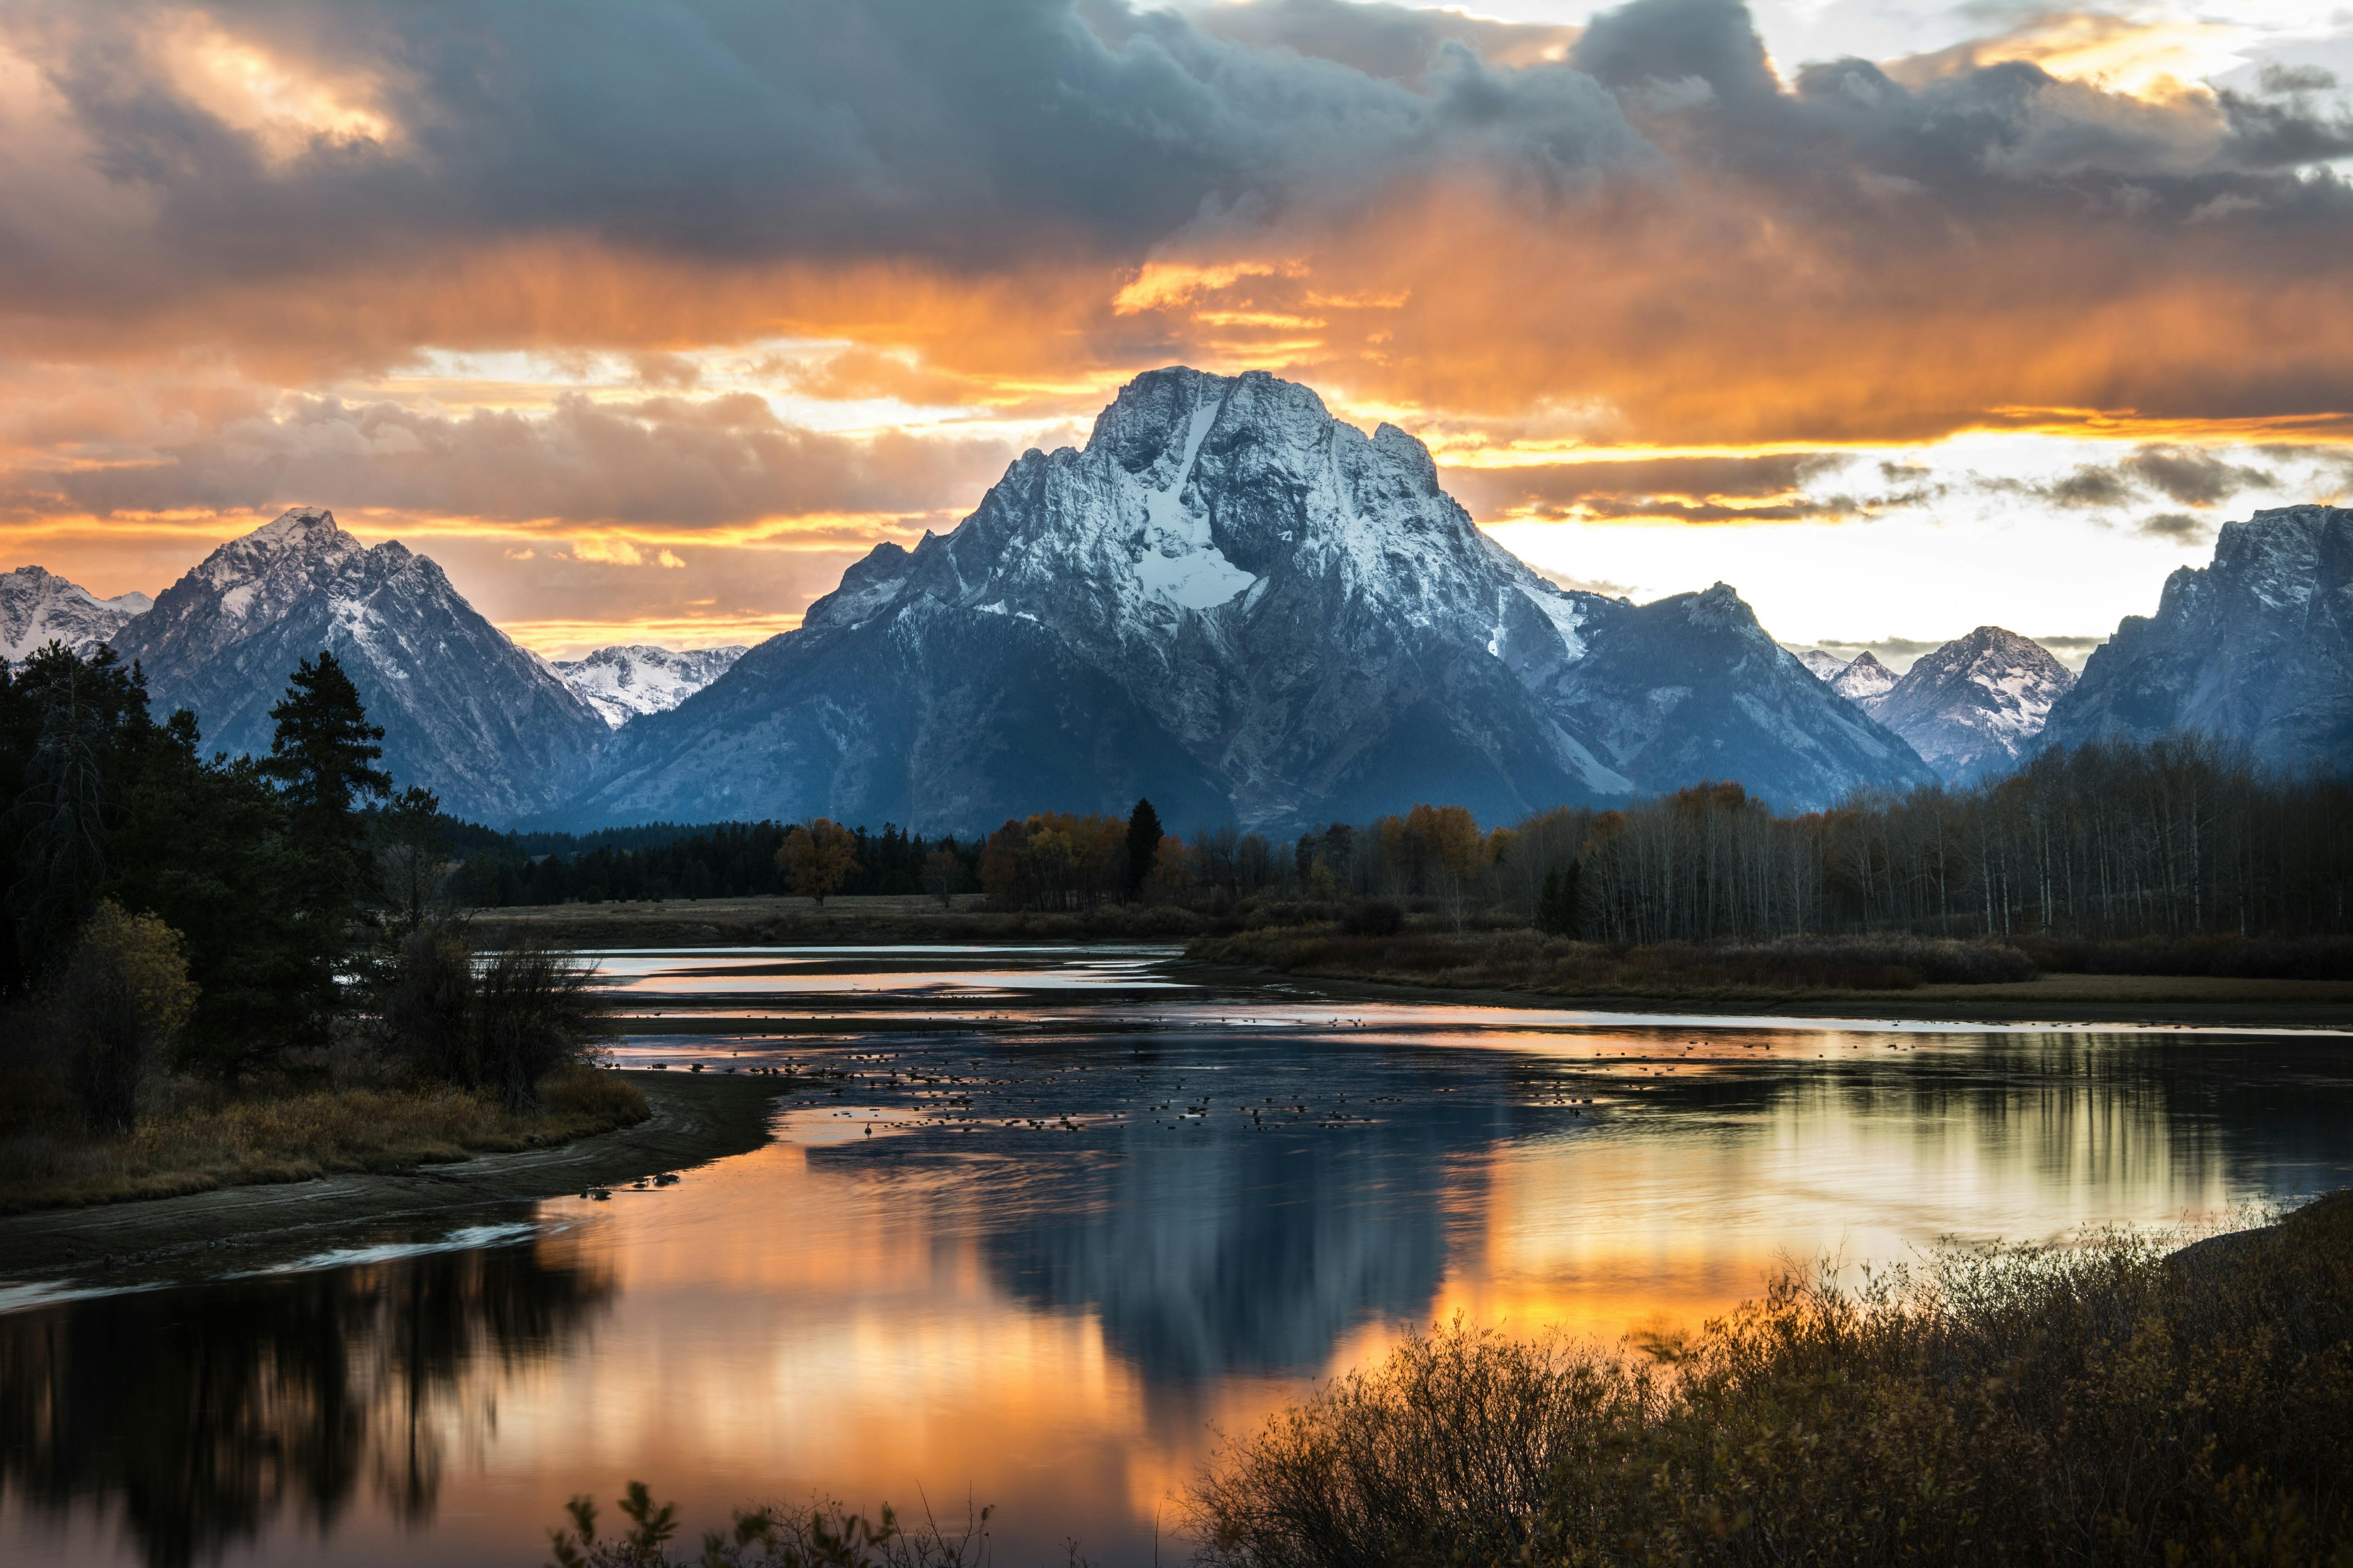 The Tetons rise in the background of the image with the sun setting behind them. The sunset is reflected on a wide river in the foreground.